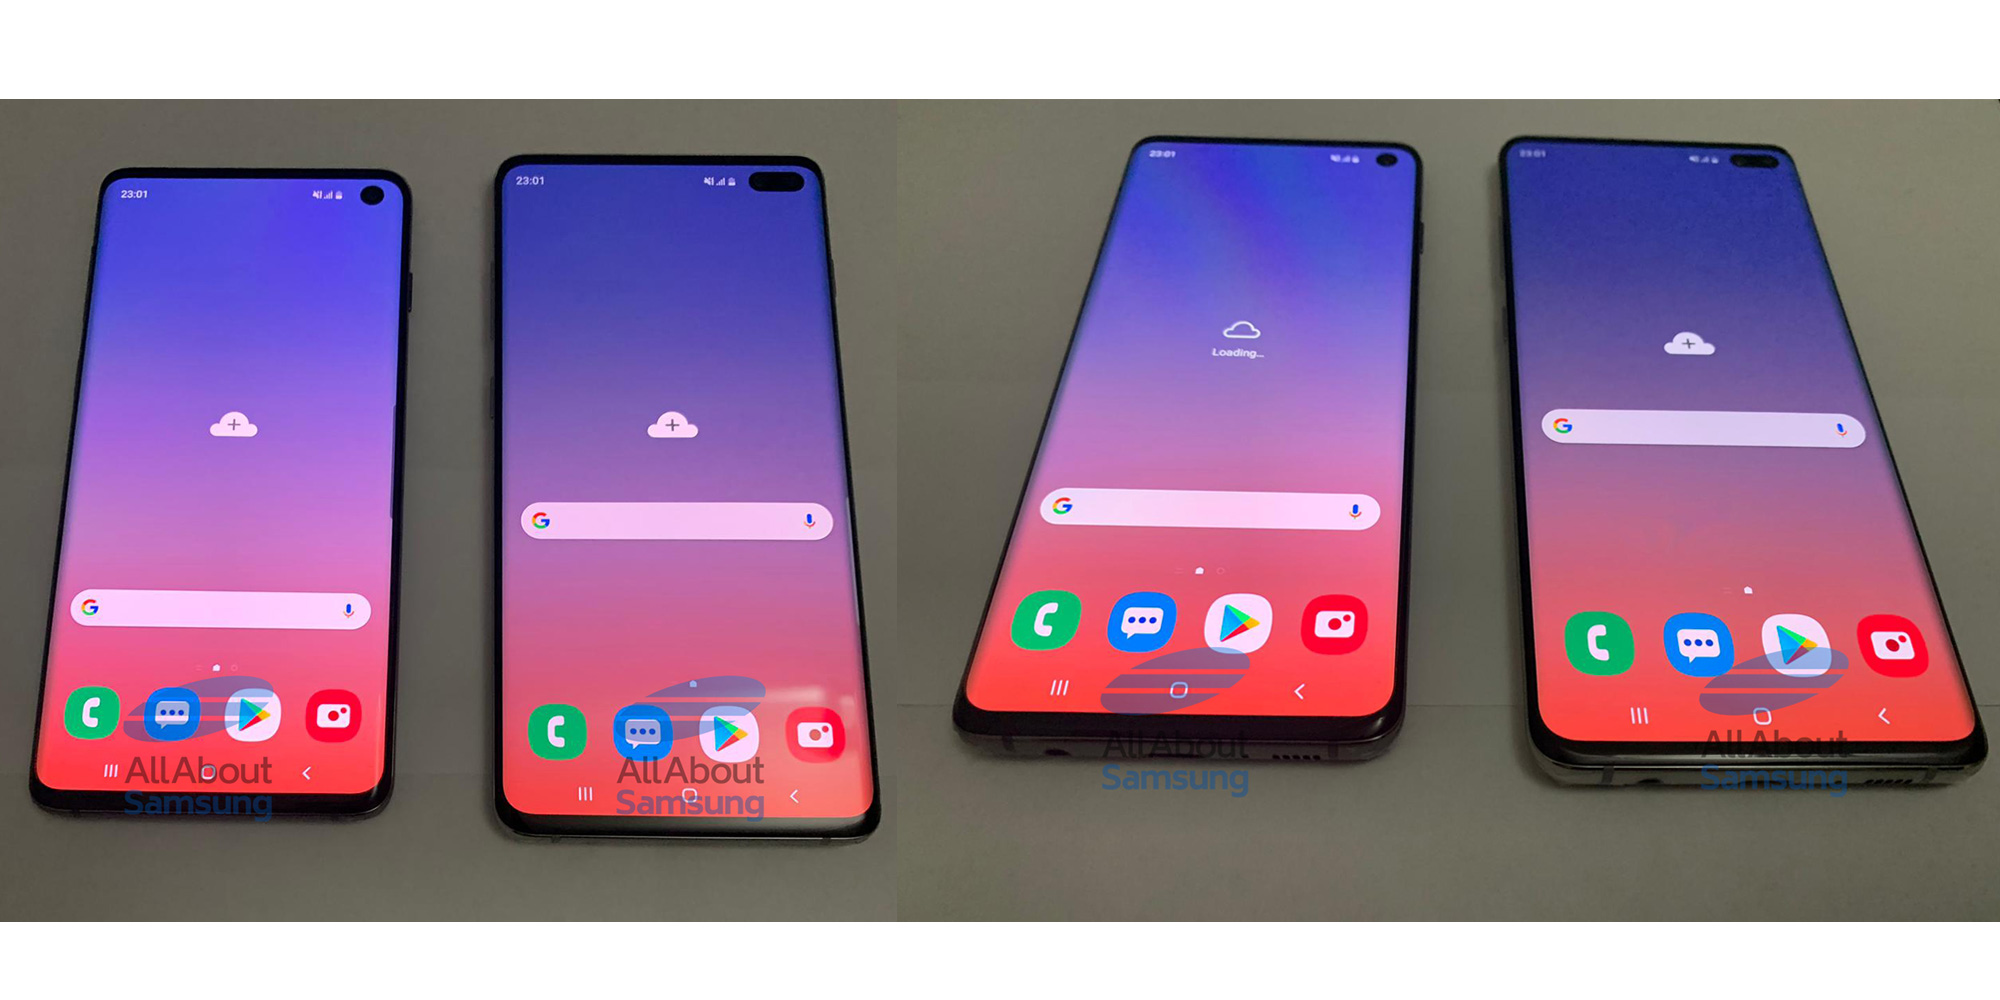 Samsung Galaxy S10 and S10 Plus prototypes leak in full - 9to5Google2000 x 1000